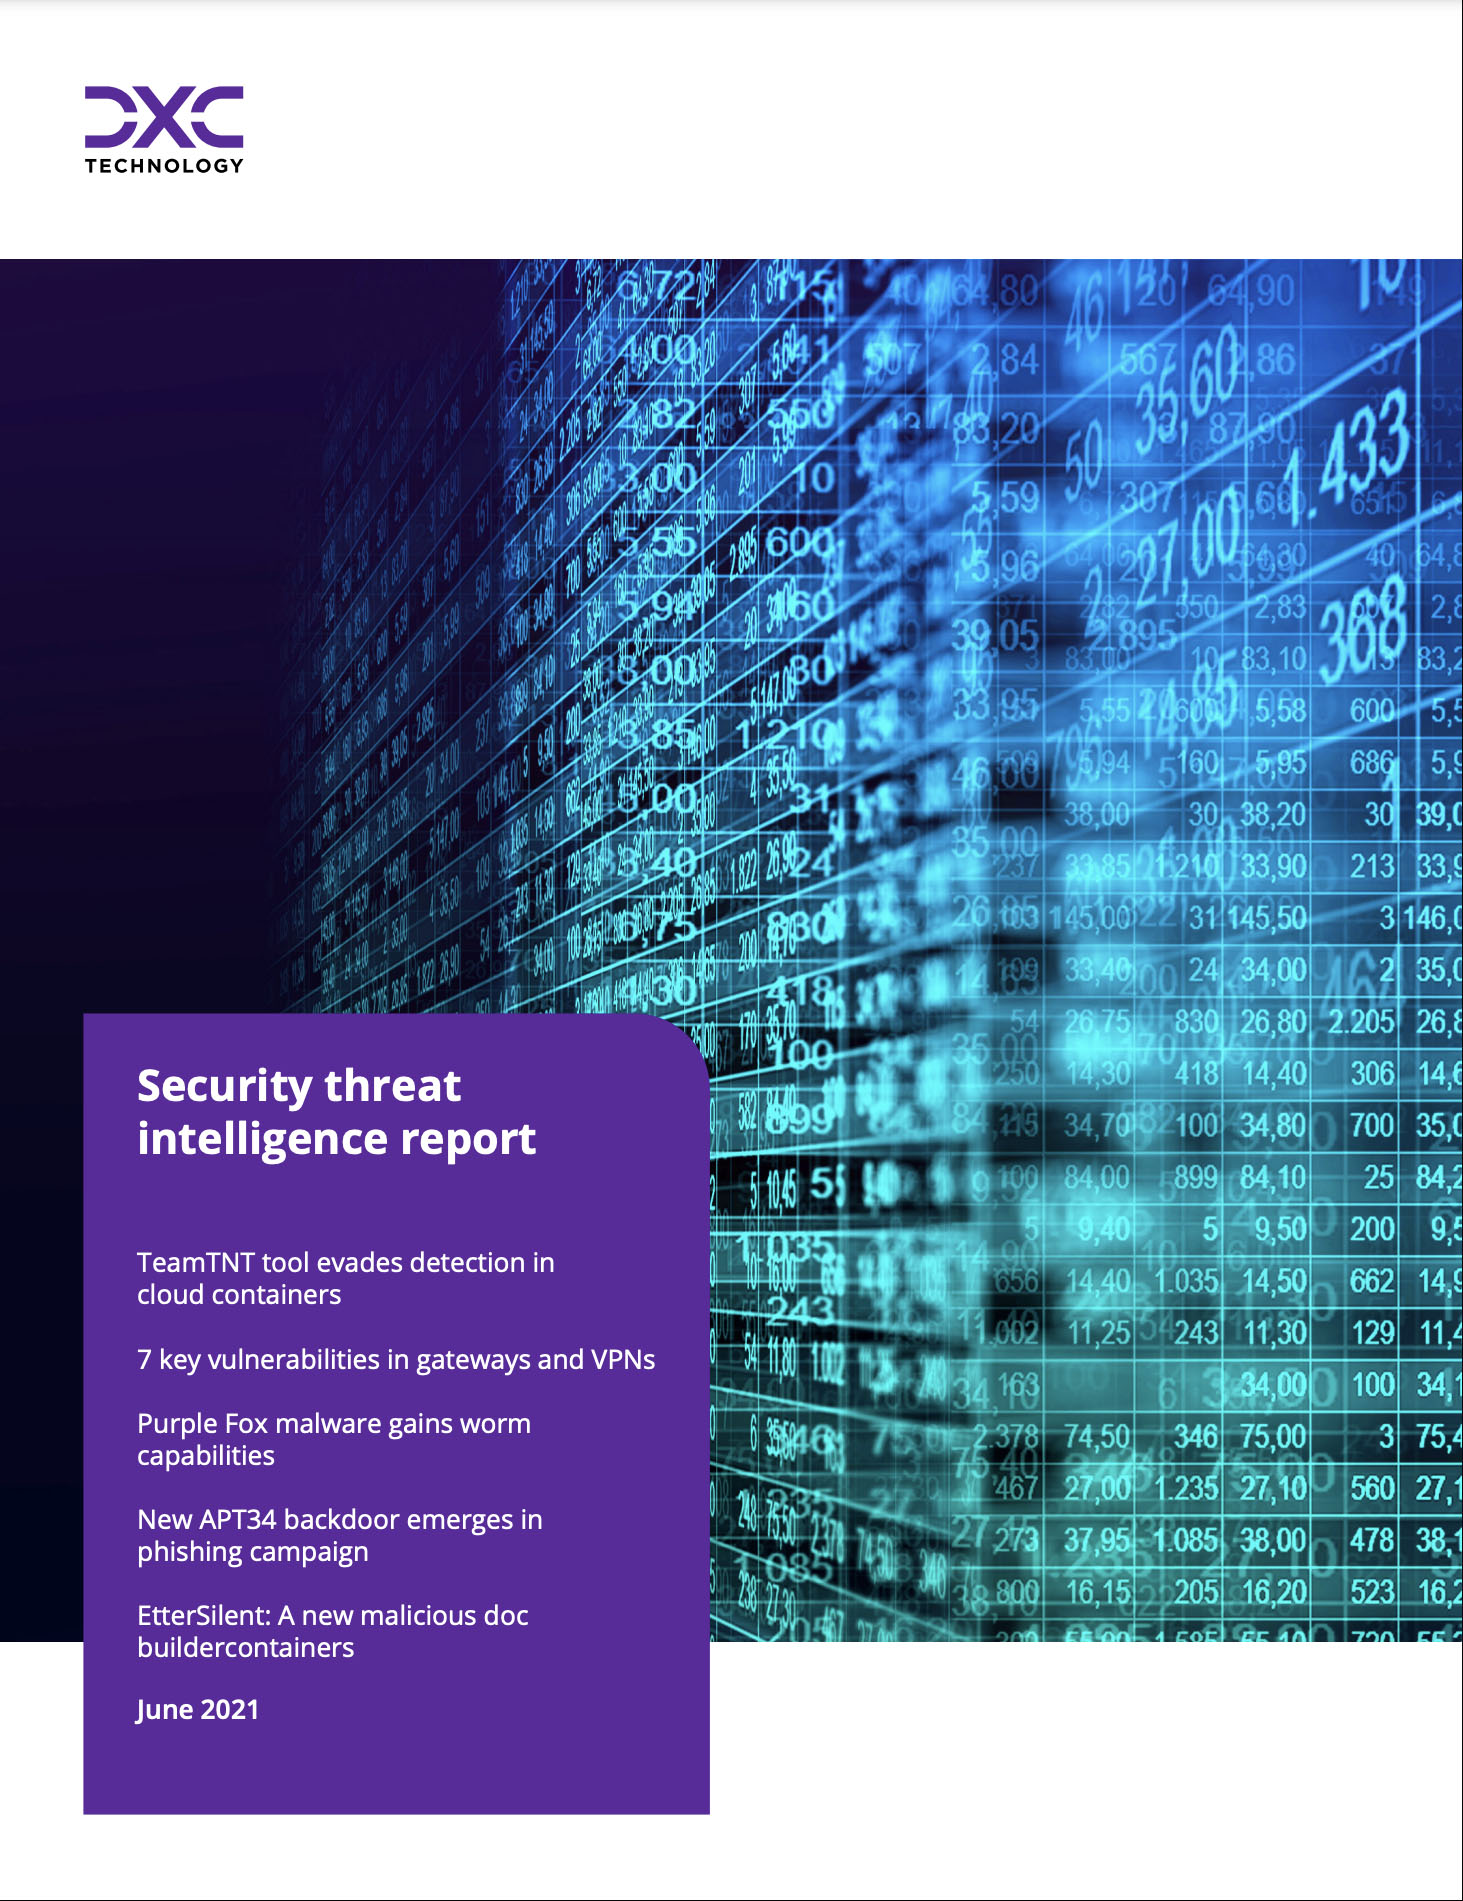 Threat-Intelligence-Report---Cover-Image_197x255px.jpg